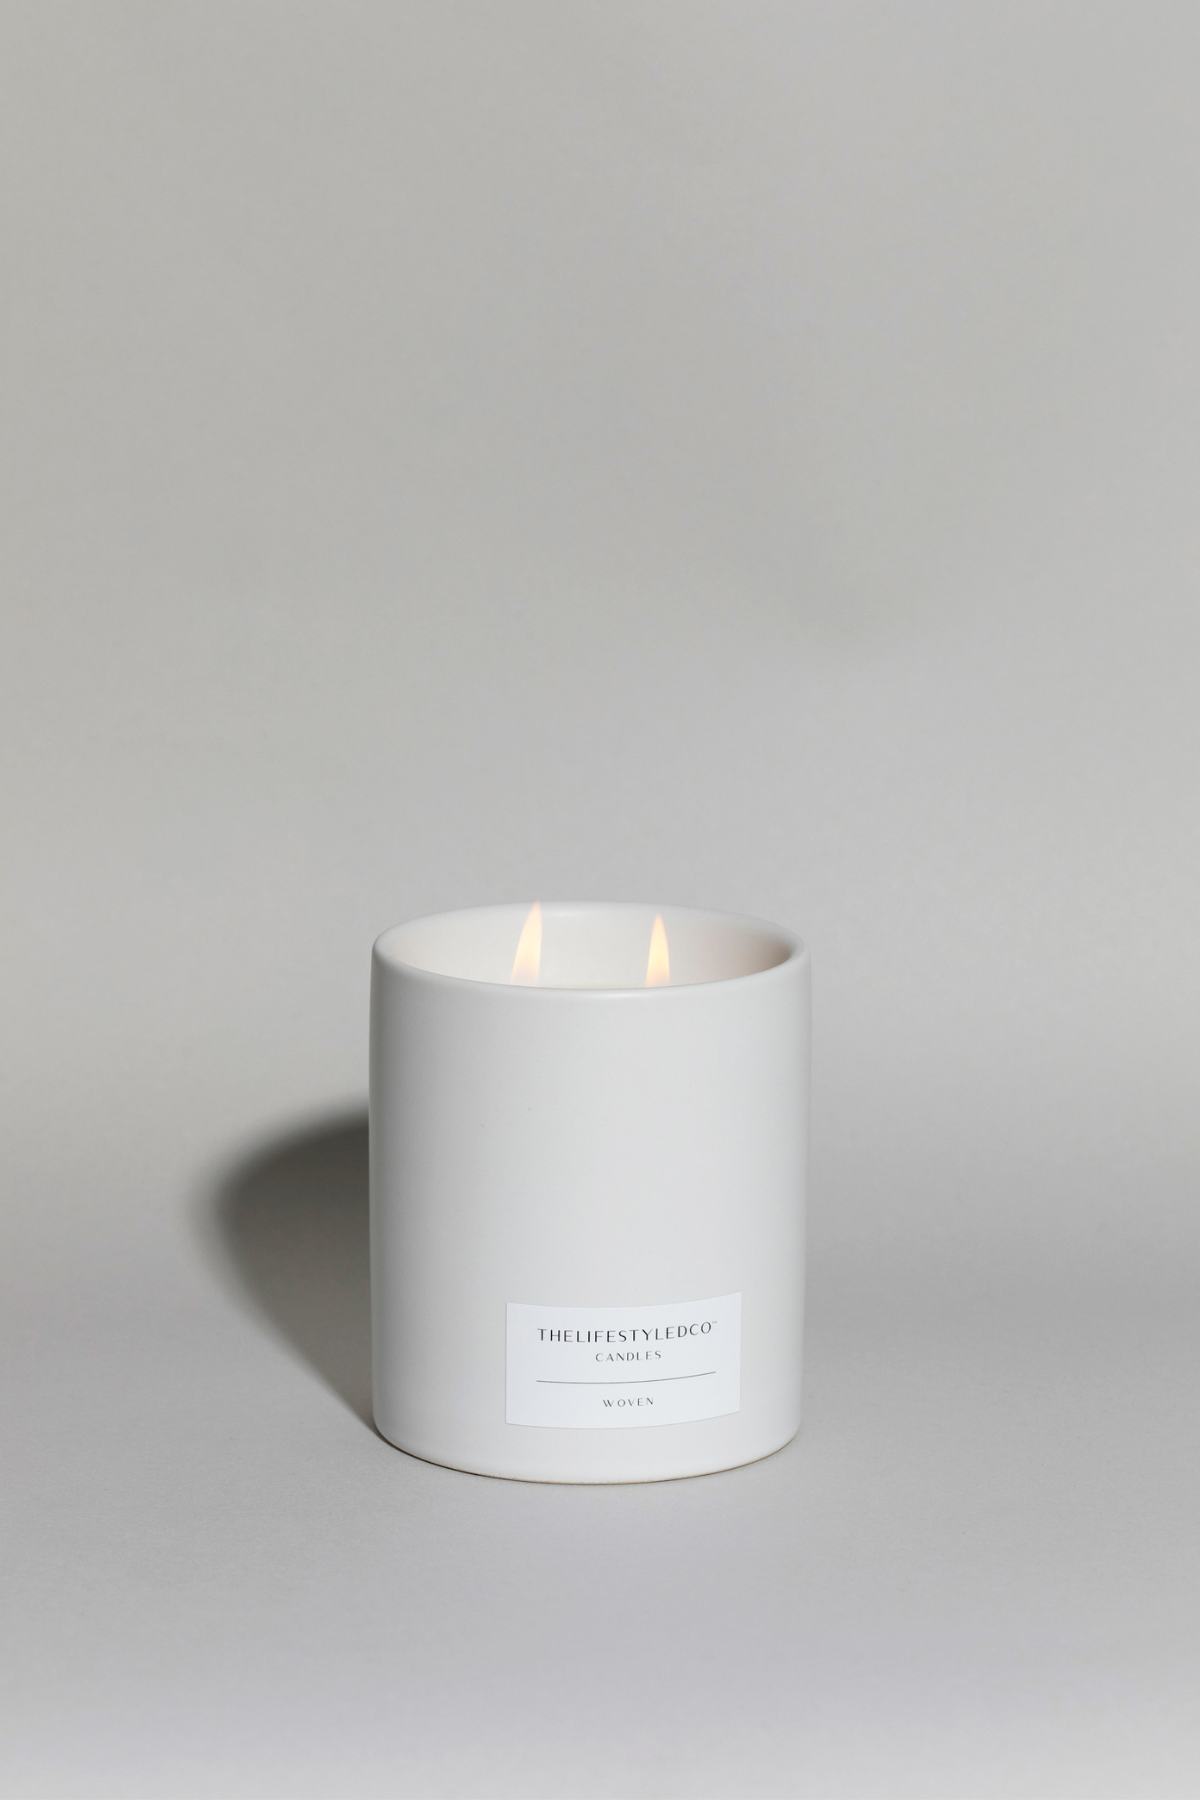 LCO EXCLUSIVE - Woven Double Wick Candle - 13 oz